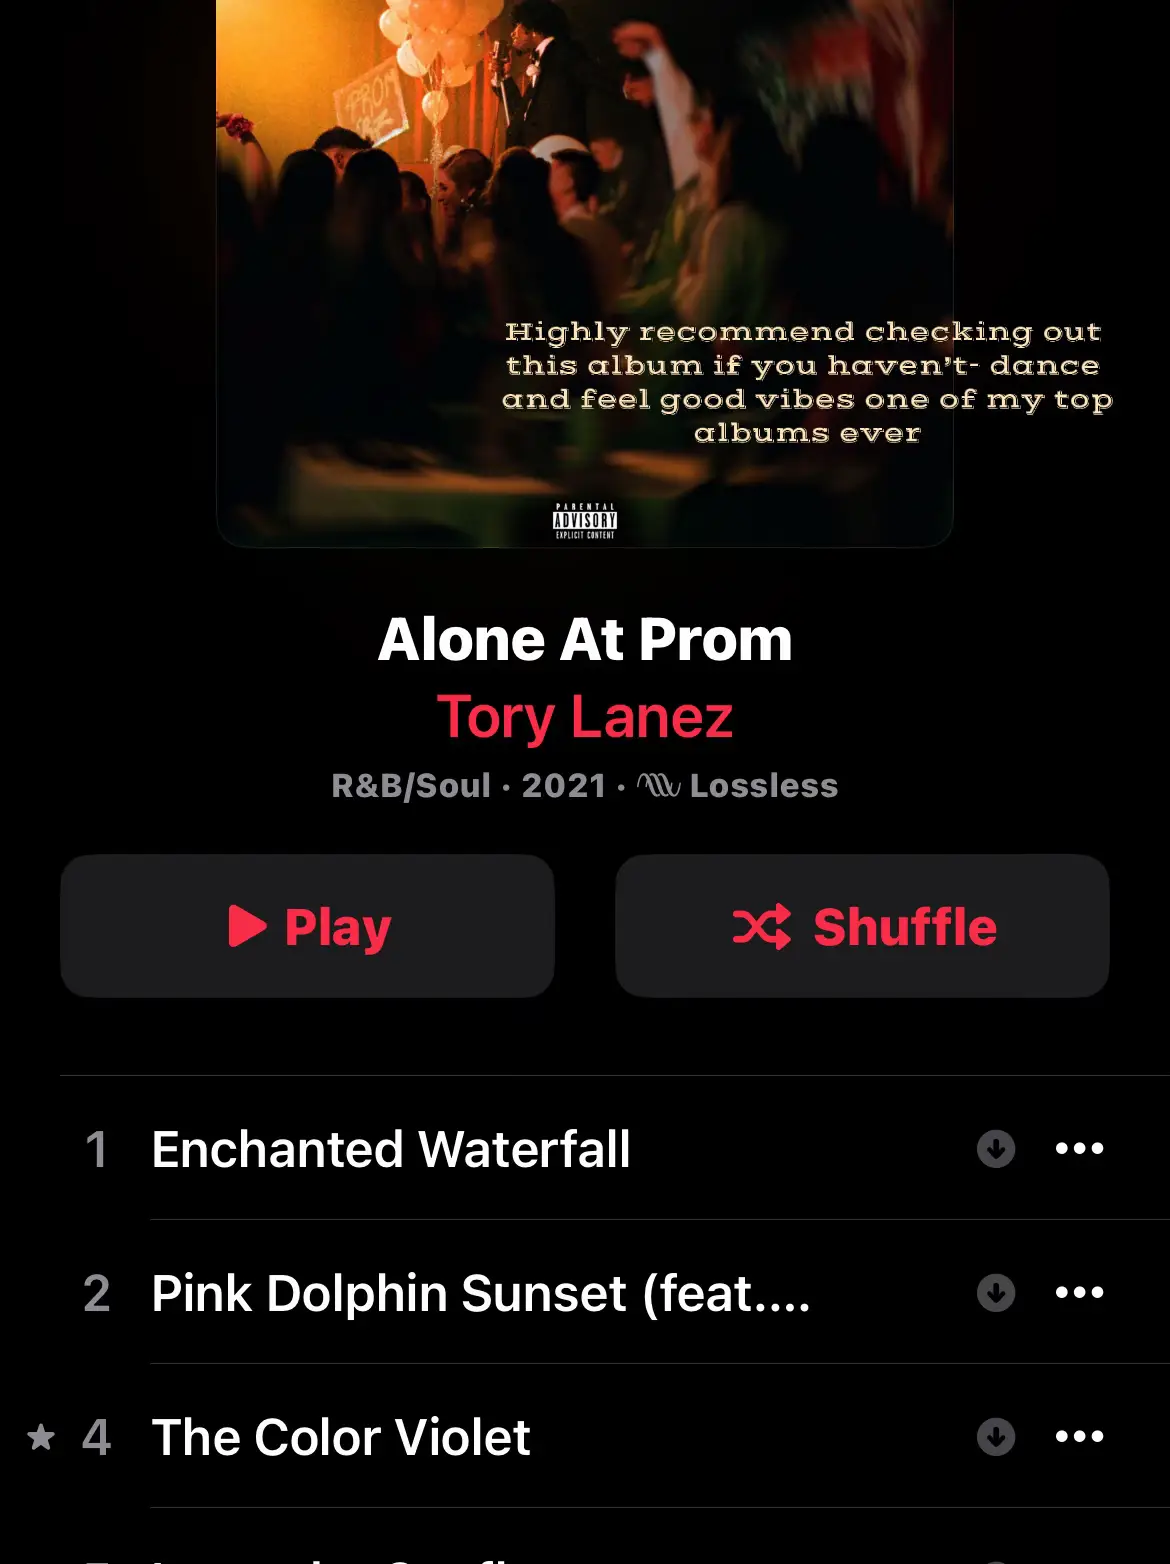  A list of songs for an album by Tory Lanez.